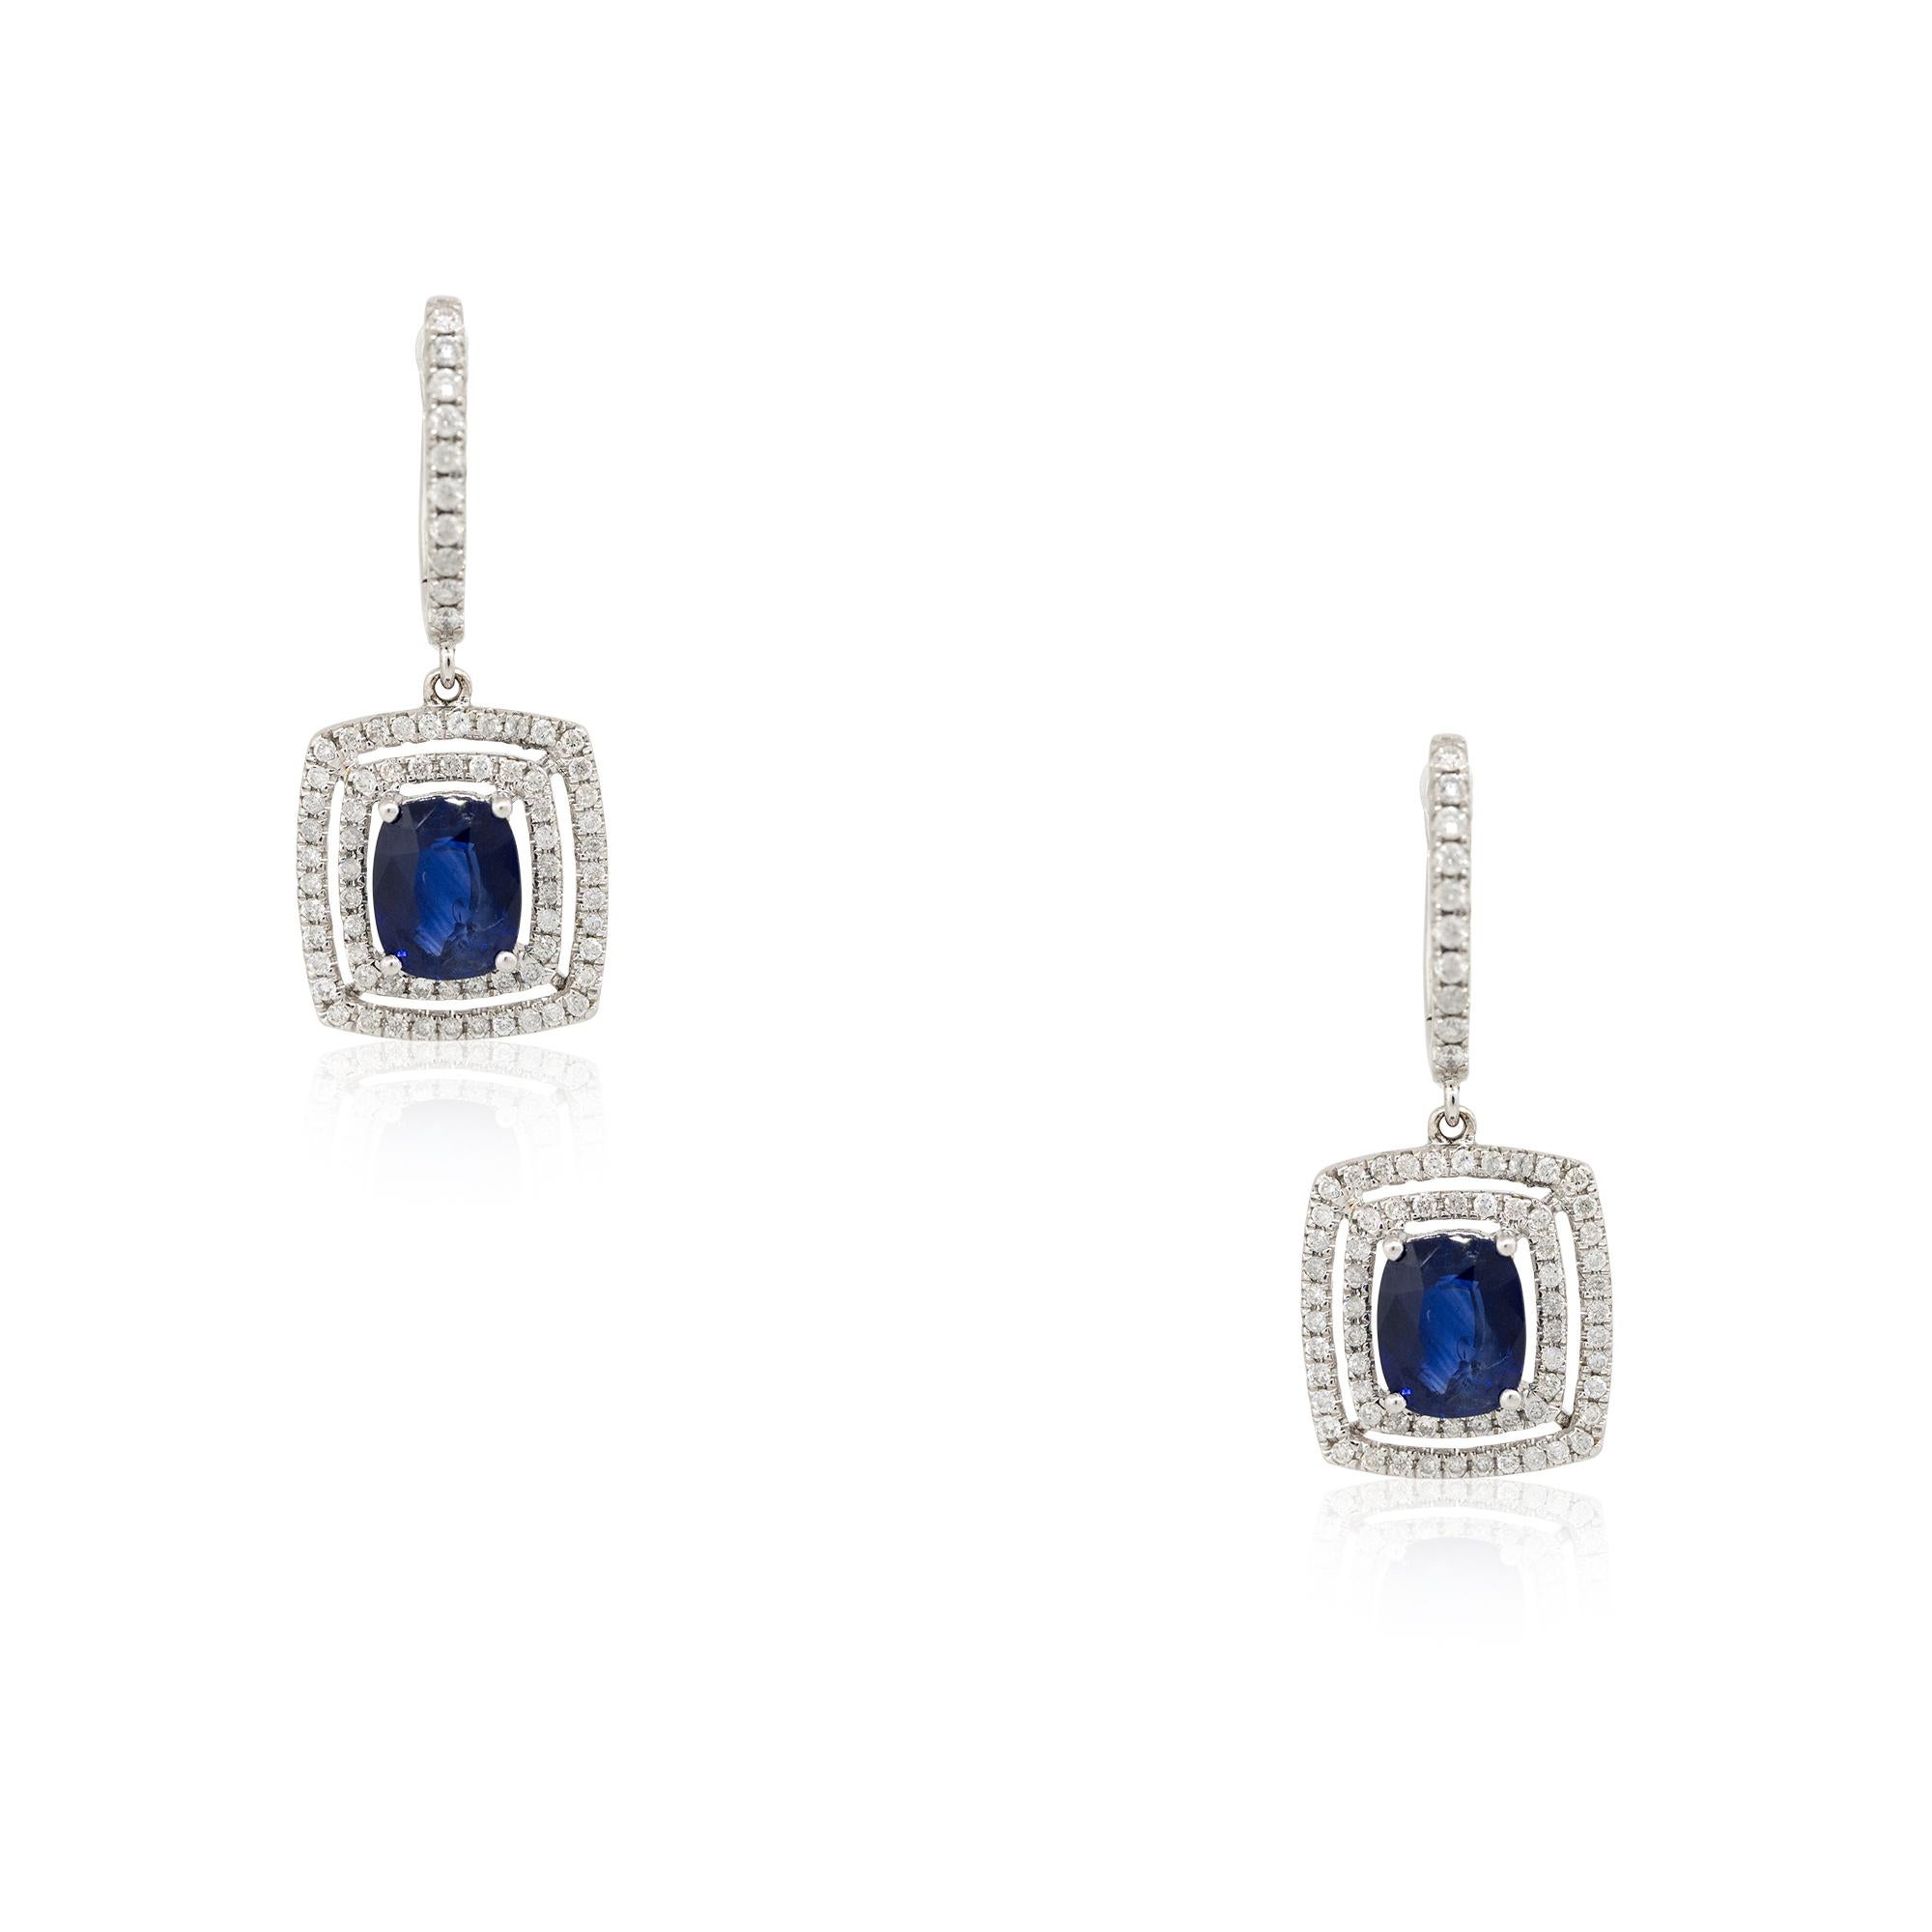 18k White Gold 3.13ct Sapphire & 0.69ct Diamond Double Halo Drop Earrings

Product: Sapphire & Diamond Double Halo Earrings
Material: 18k White Gold
Gemstone/ Diamond Details: There are approximately 3.13 carats of Cushion cut Sapphires (2 stones)